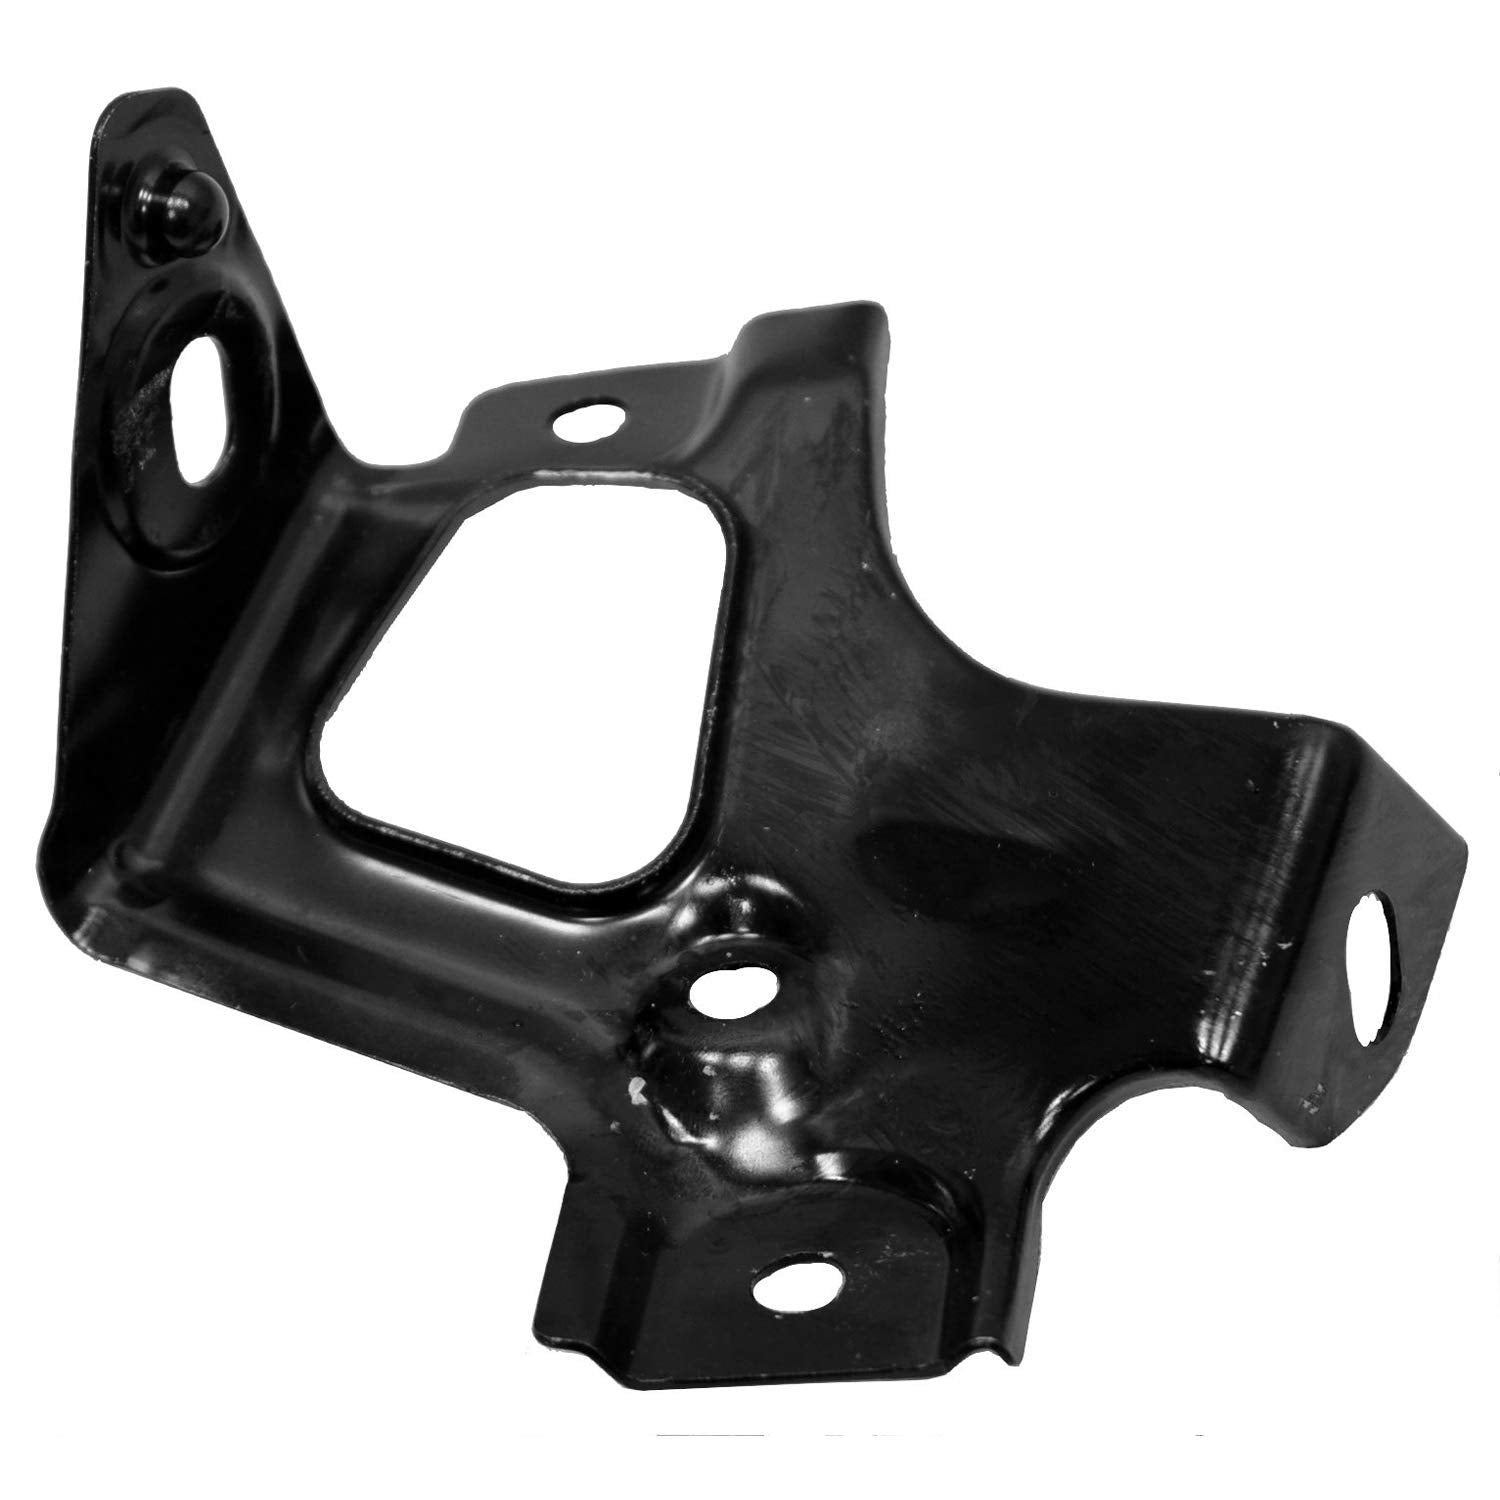 GM1244111 Front Left Side Lower Fender Brace compatible with Chevy Cruze, Cruze Limited